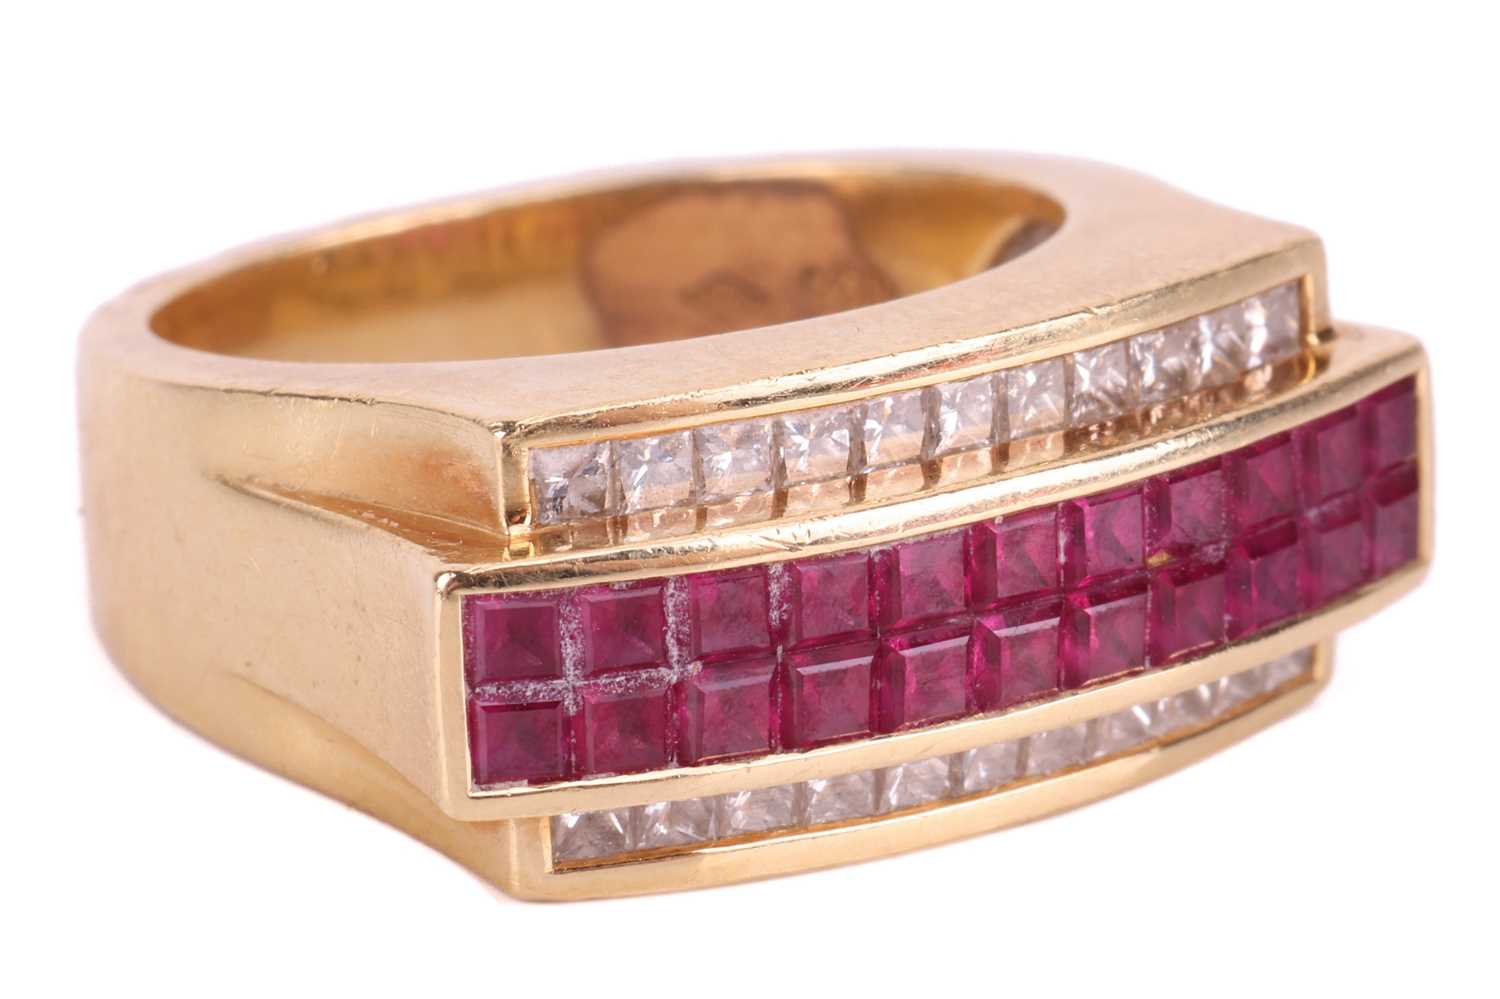 A diamond and ruby-set angular dress ring, featuring calibré-cut rubies set between two rows of prin - Image 3 of 4